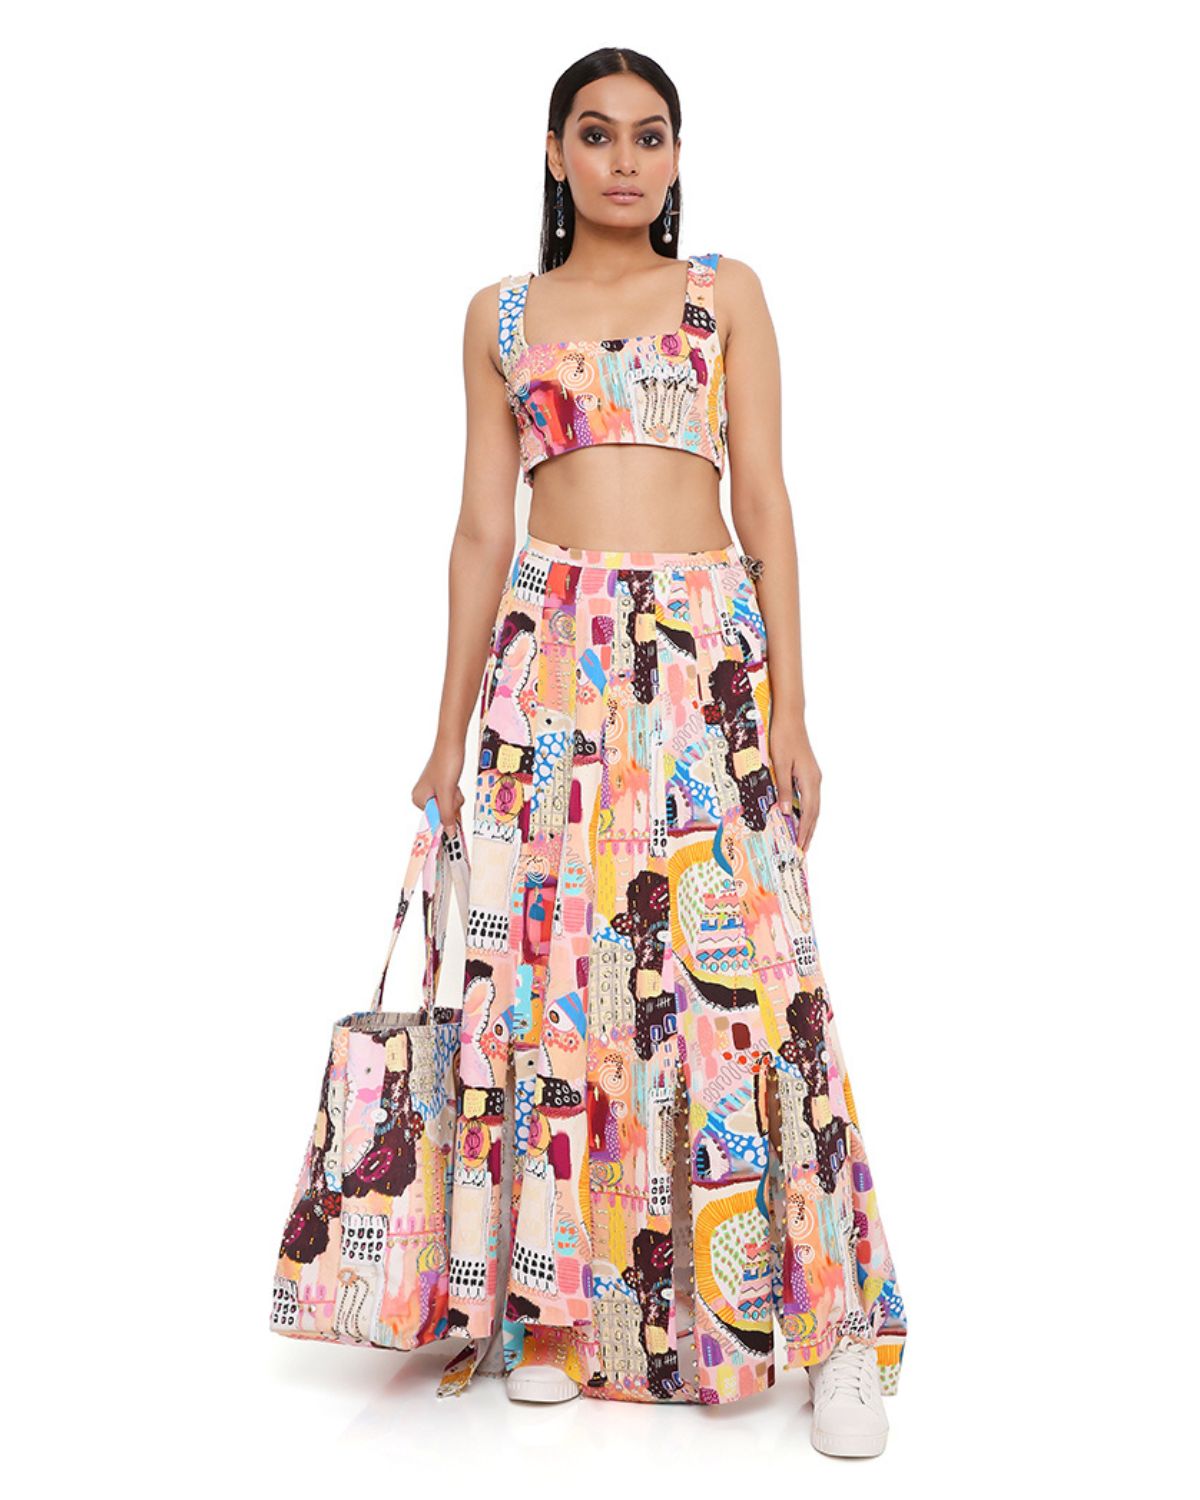 Peach Printed Top And Skirt by Payal Singhal